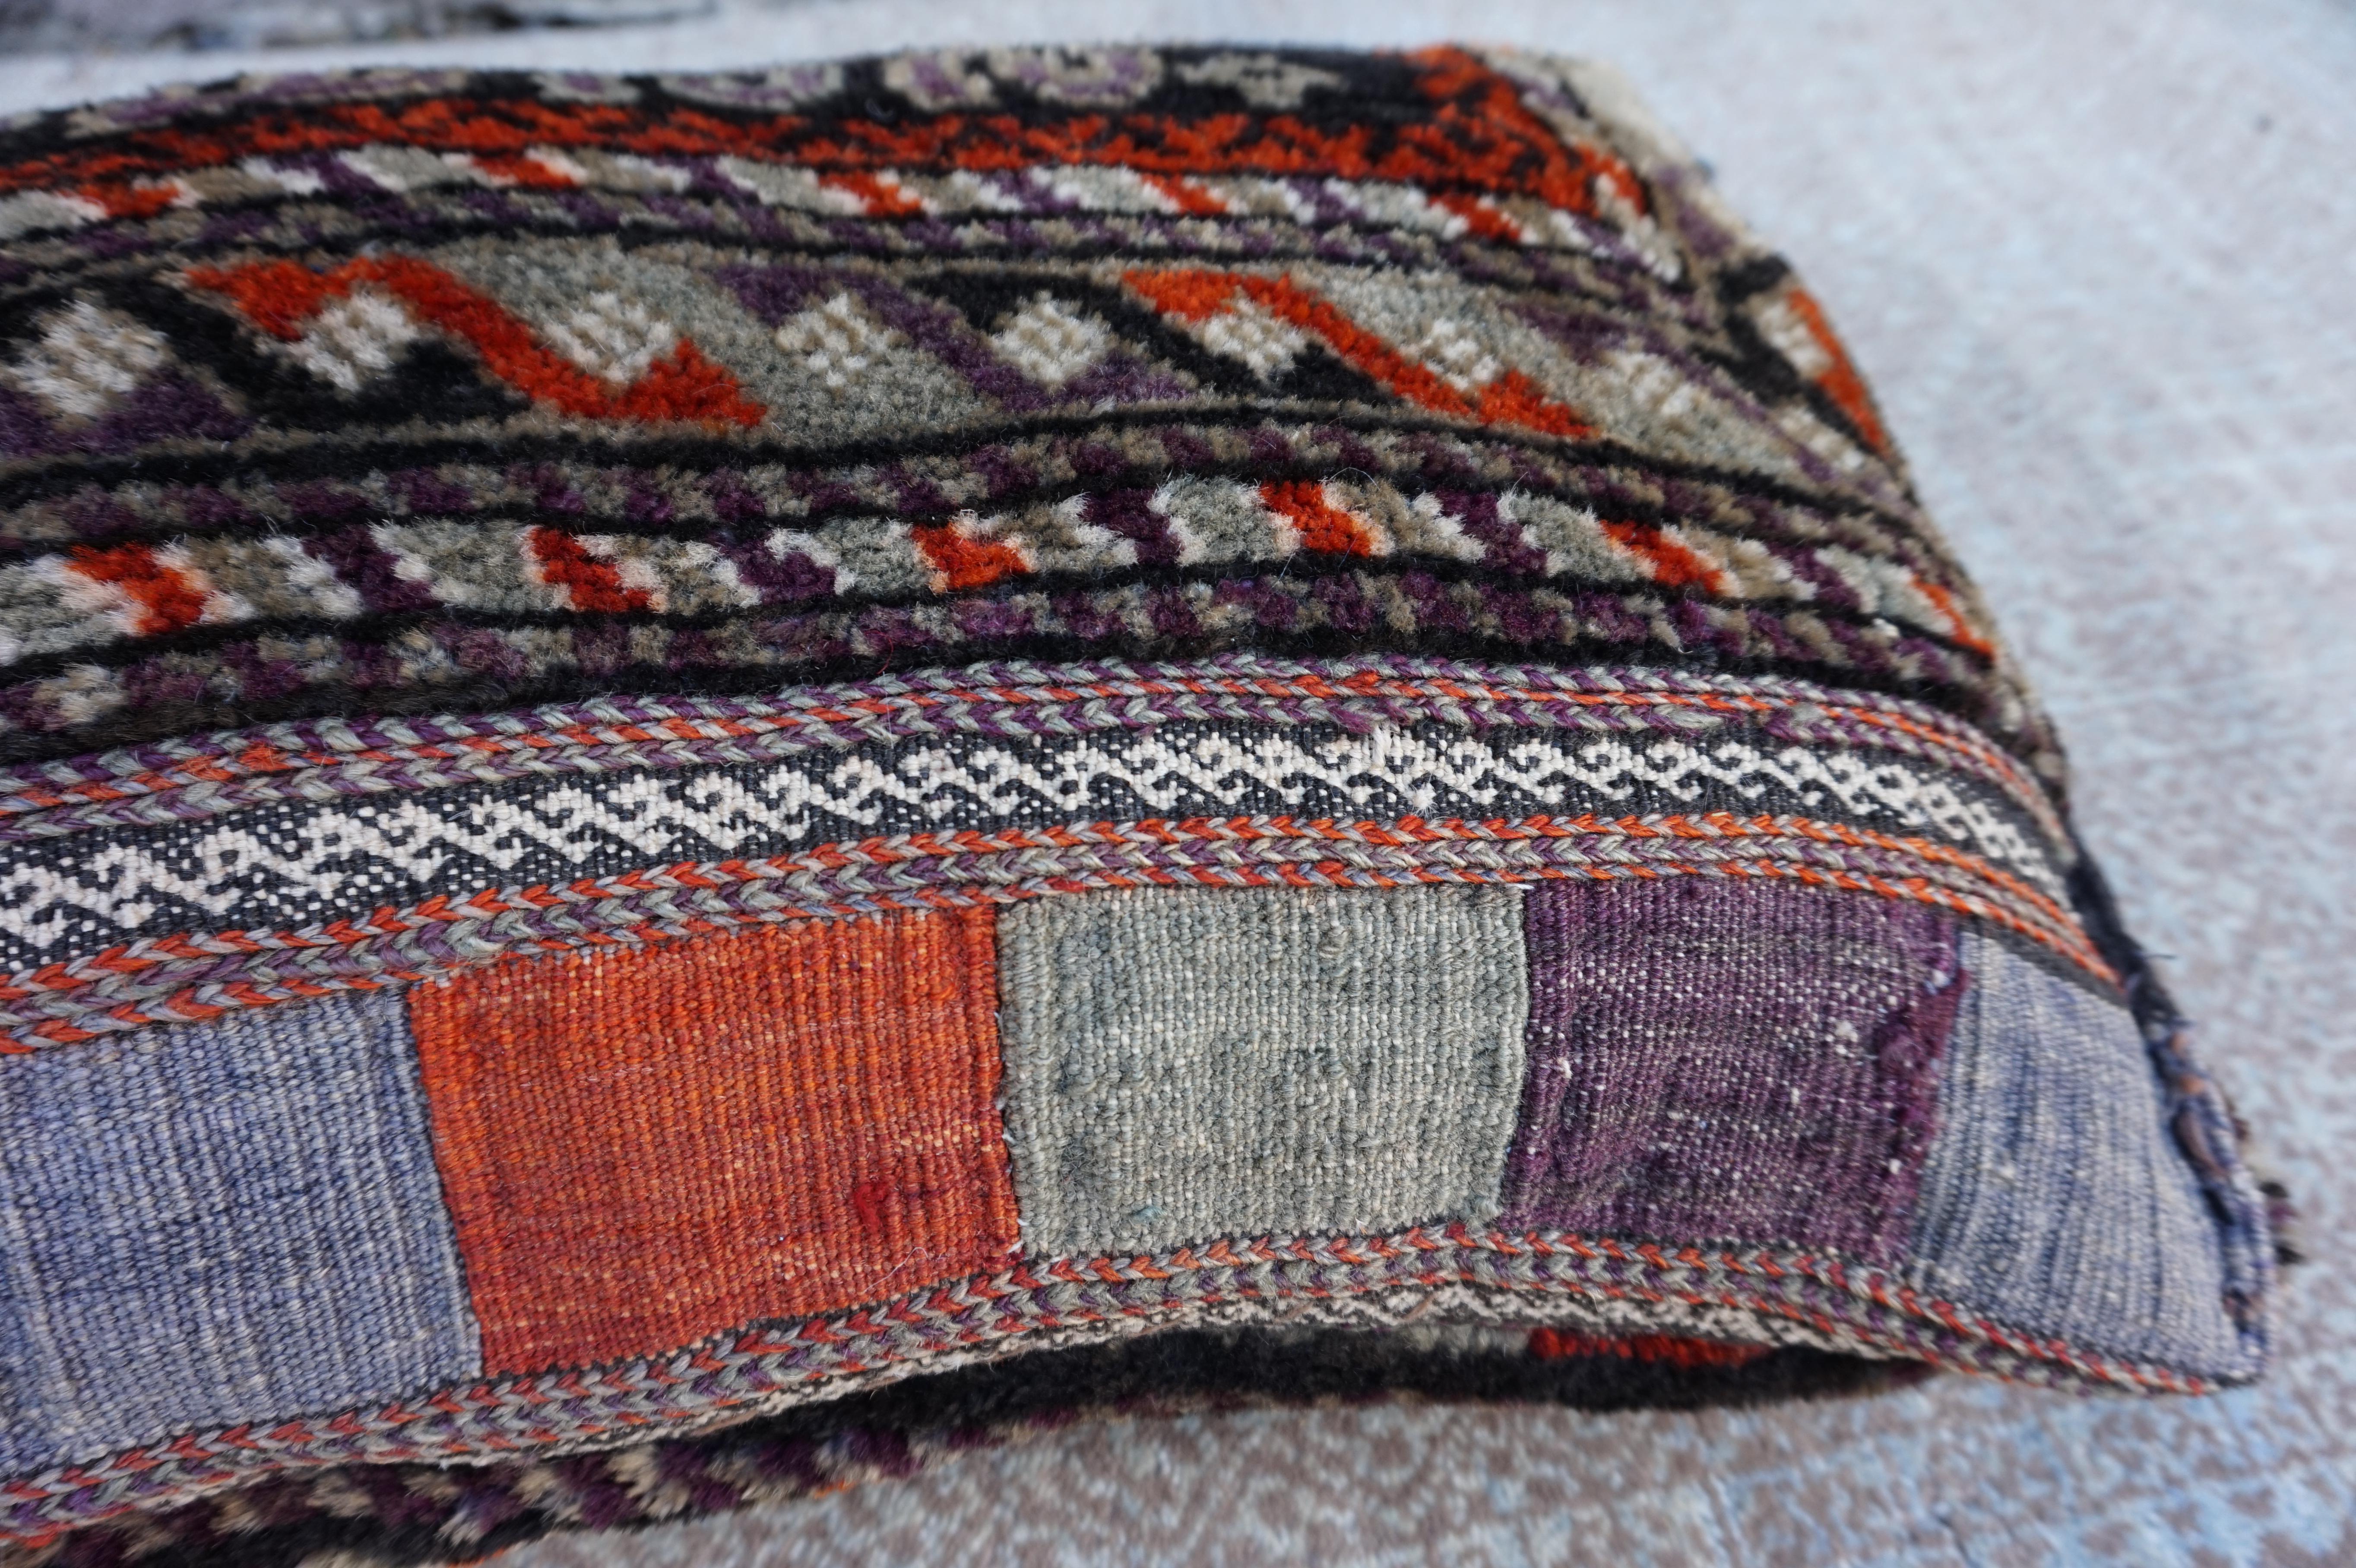 Rustic Hand-Knotted Wool Cushion Pillow with Geometric Tribal Patterns For Sale 5